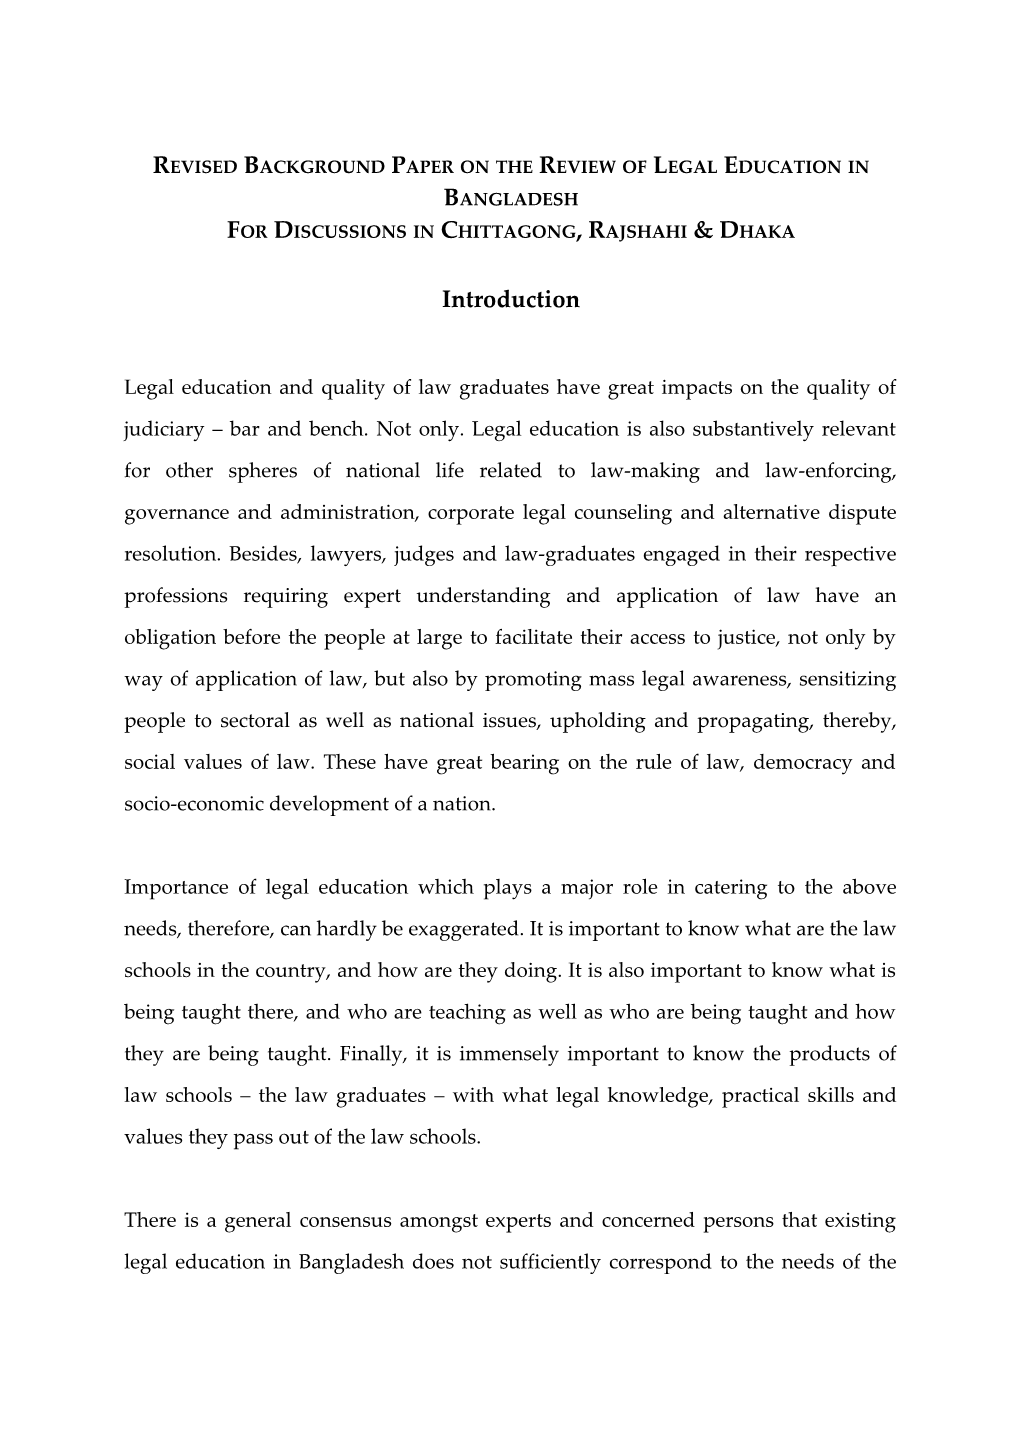 Background Paper on the Review of Legal Education in Bangladesh